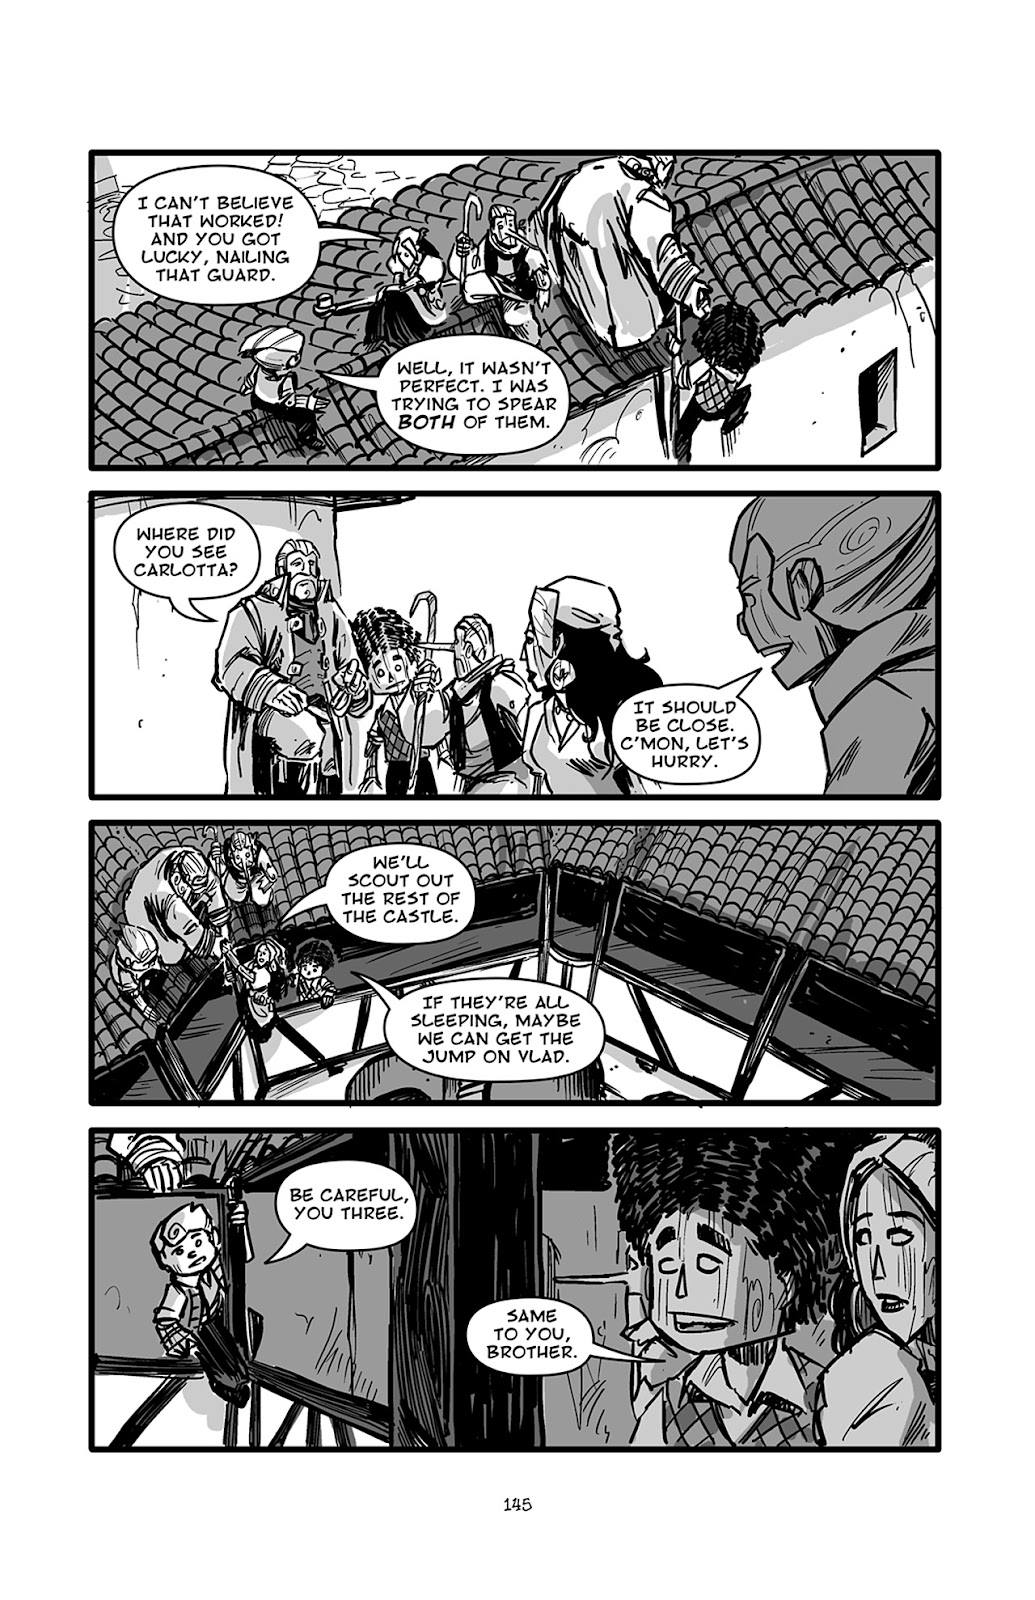 Pinocchio: Vampire Slayer - Of Wood and Blood issue 6 - Page 18